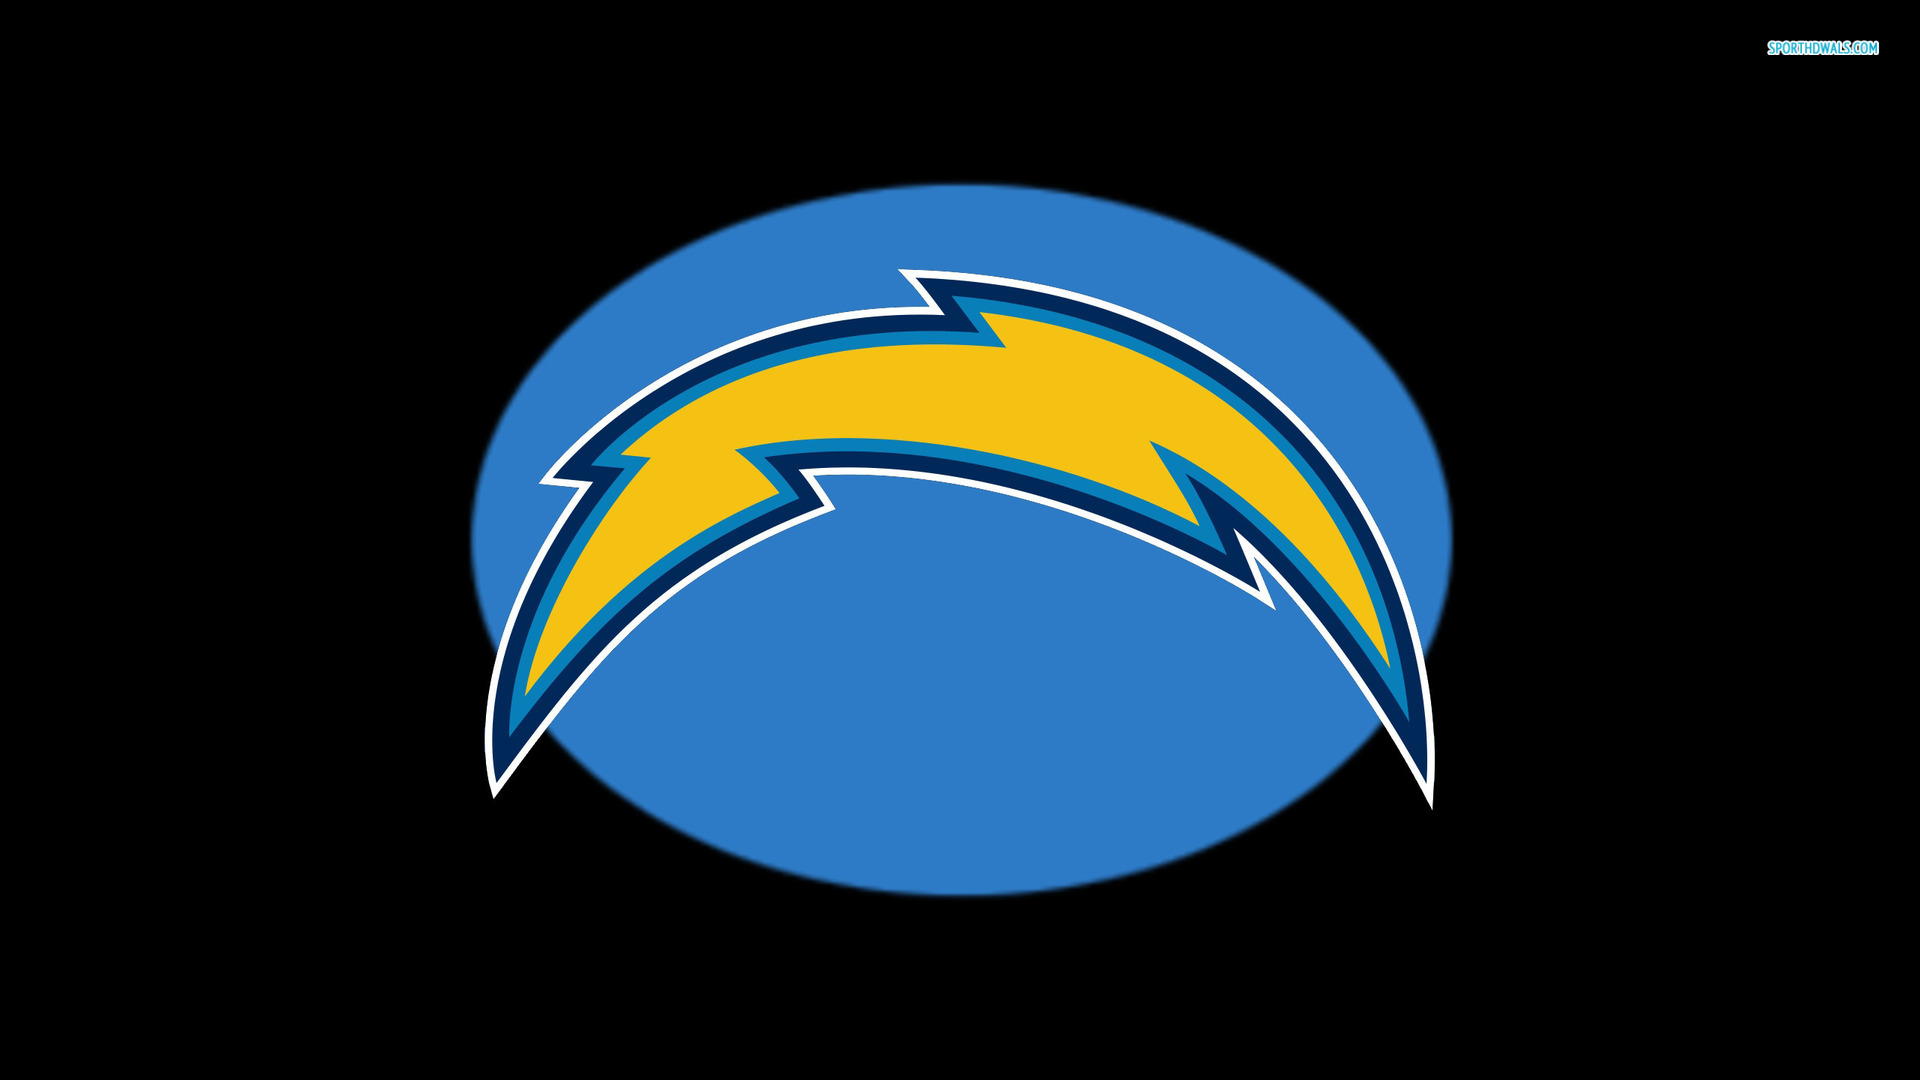 SAN DIEGO CHARGERS nfl football bw wallpaper background